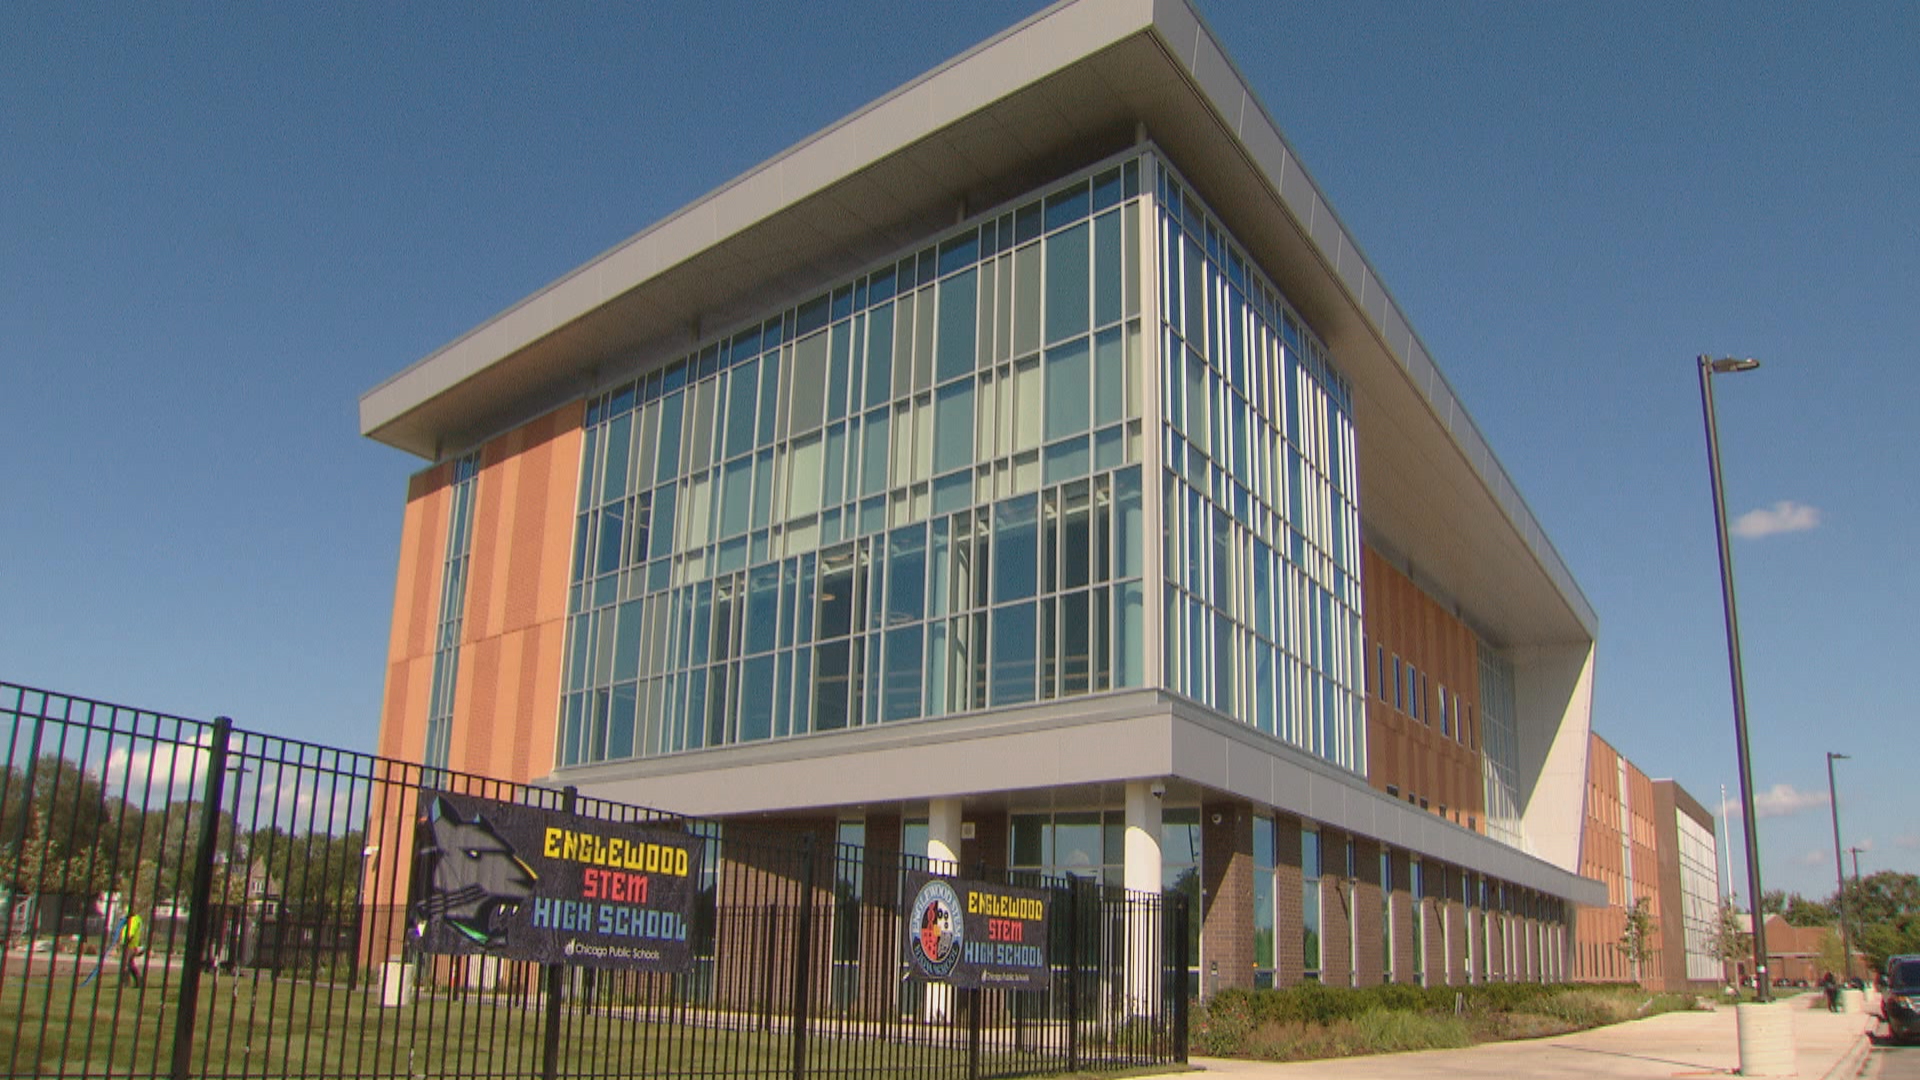 The new Englewood STEM High School welcomes its inaugural class of students for the 2019-20 school year. (WTTW News)